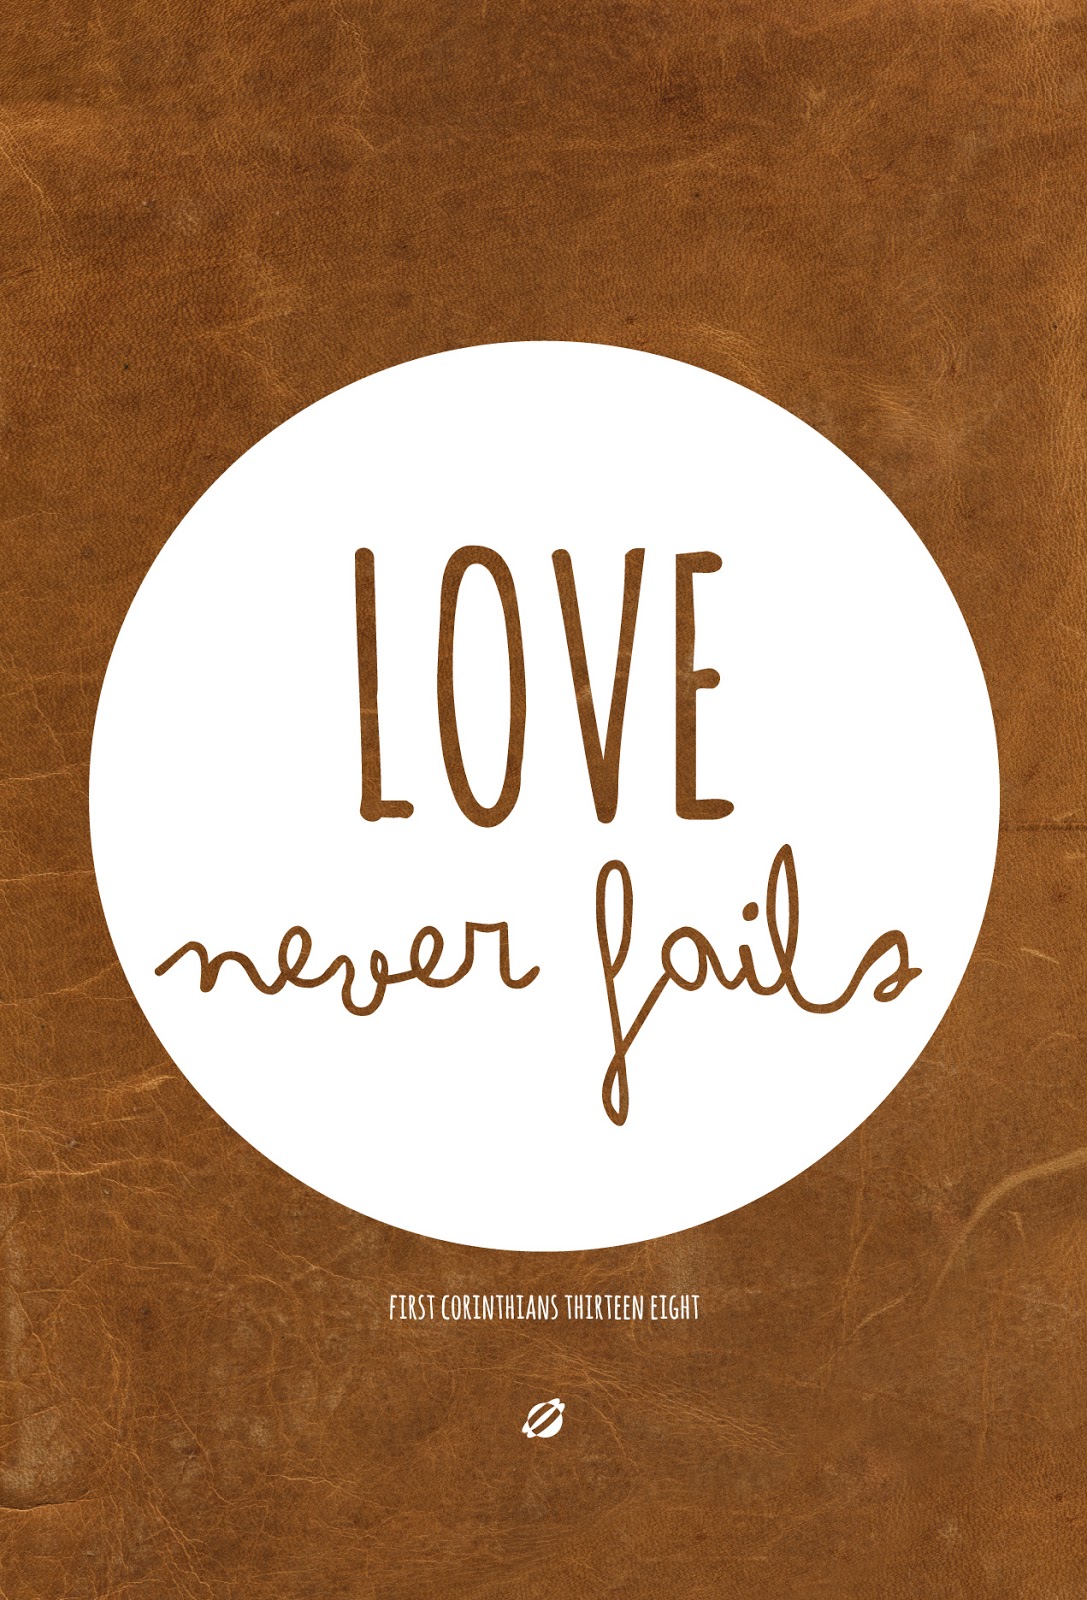 LostBumblebee ©2014 Love Never Fails FREE PRINTABLE for personal use only